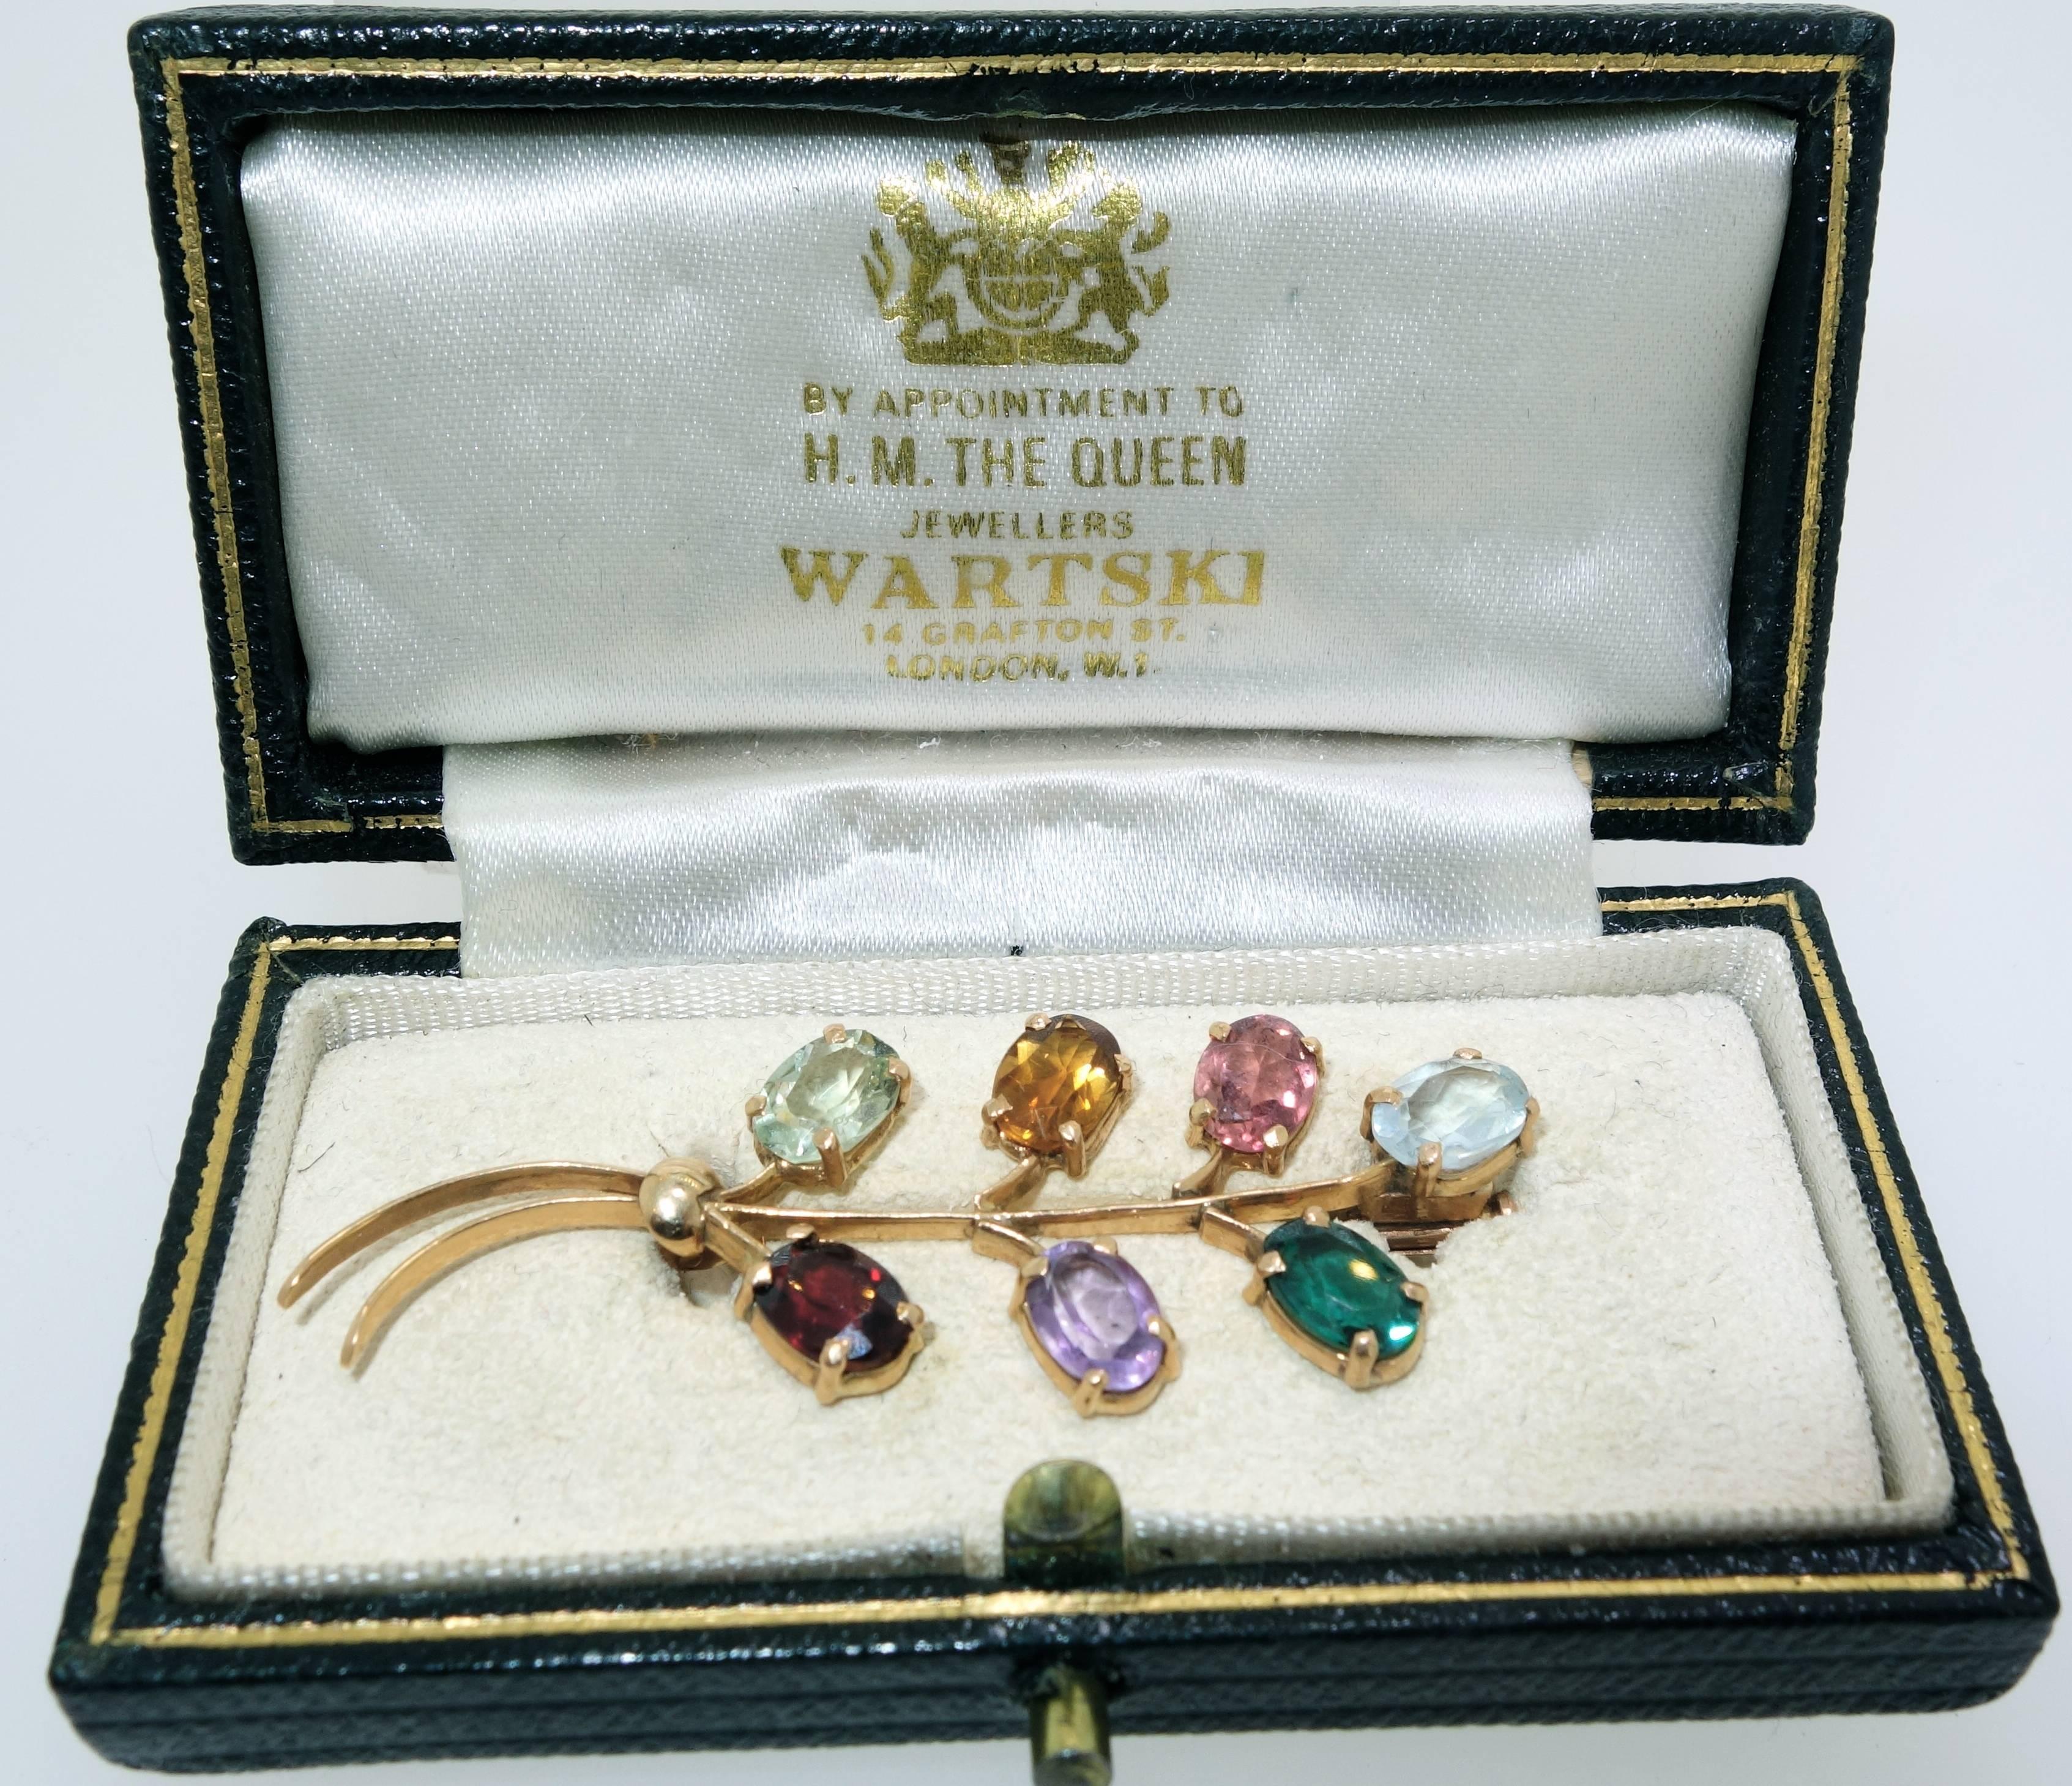 Antique brooch in a fitted box  by Warski London, (however, not signed), this 18K antique piece possess all natural stones: Aquamarine, tourmaline, amethyst, garnet, and citrine.  This colorful bouquet is just over two inches in length. 